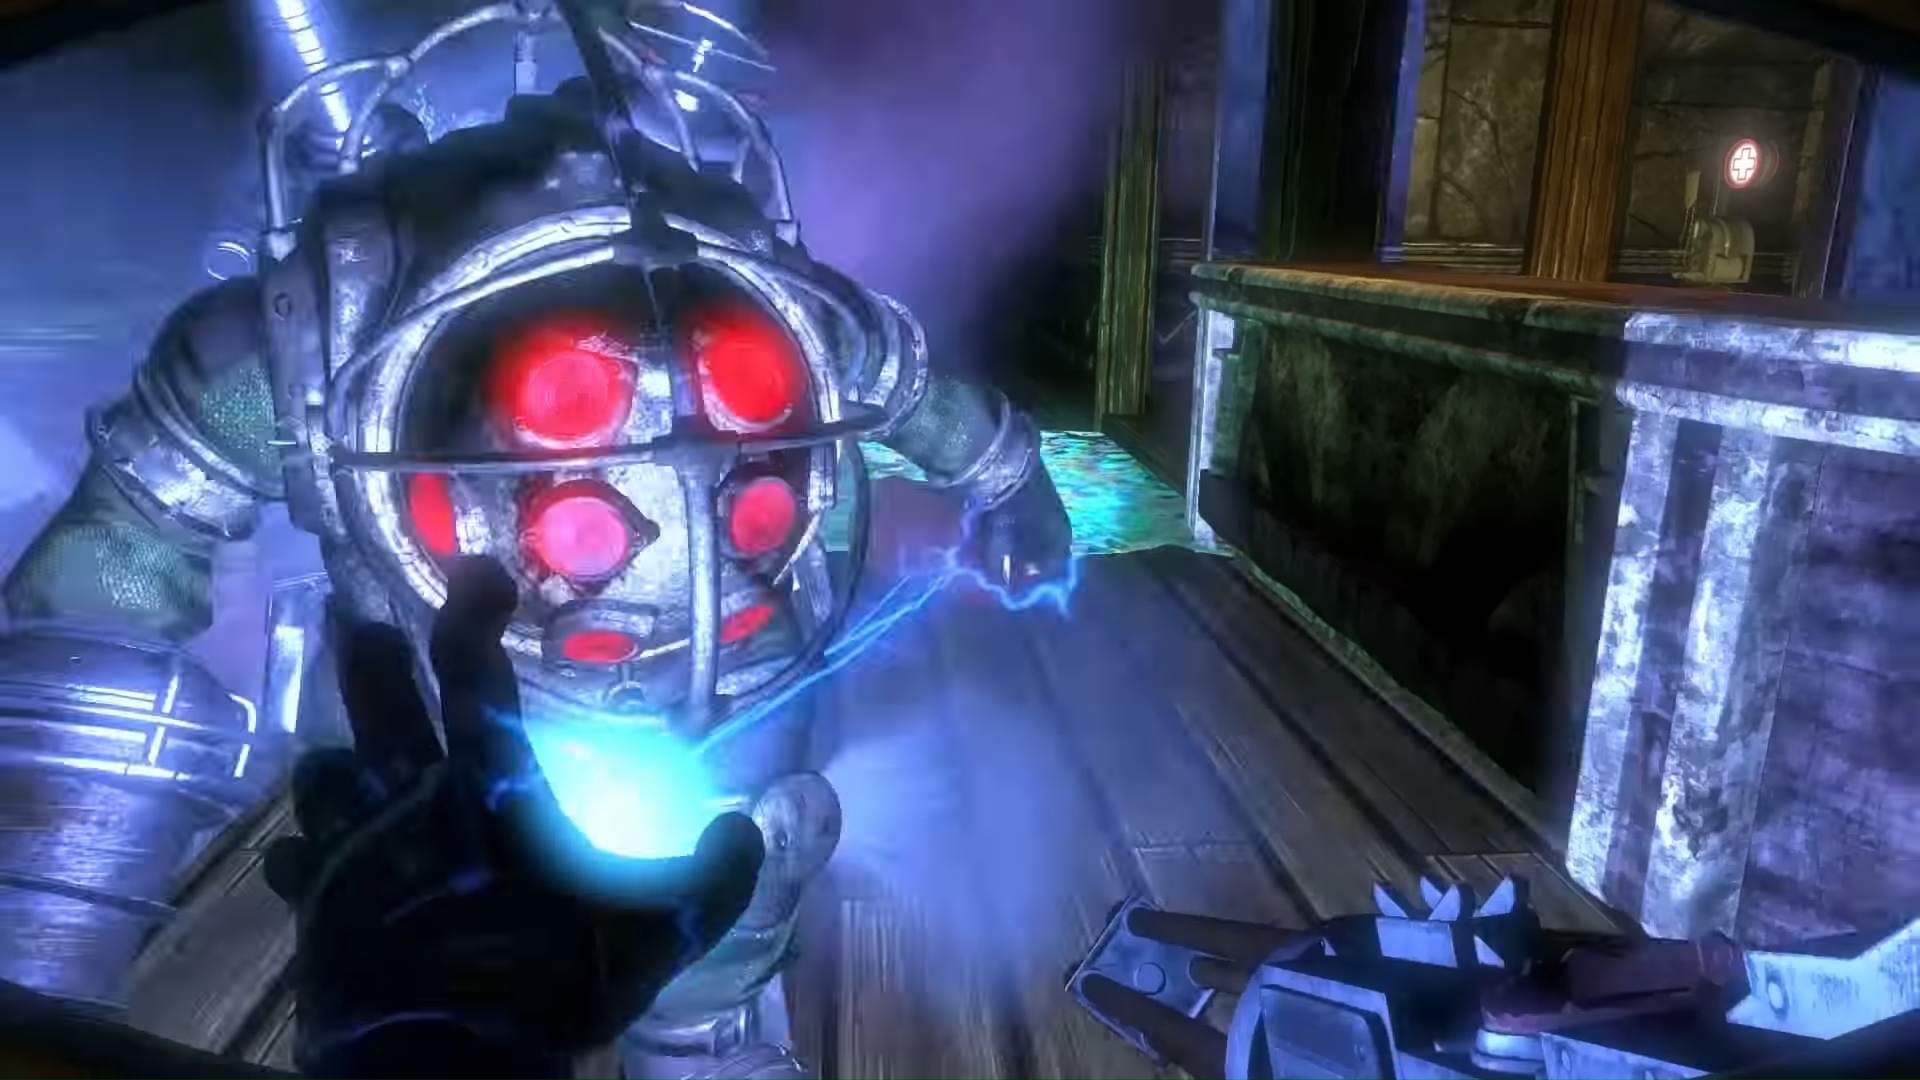 All BioShock games and 18 others at $0.73 in Humble Bundle